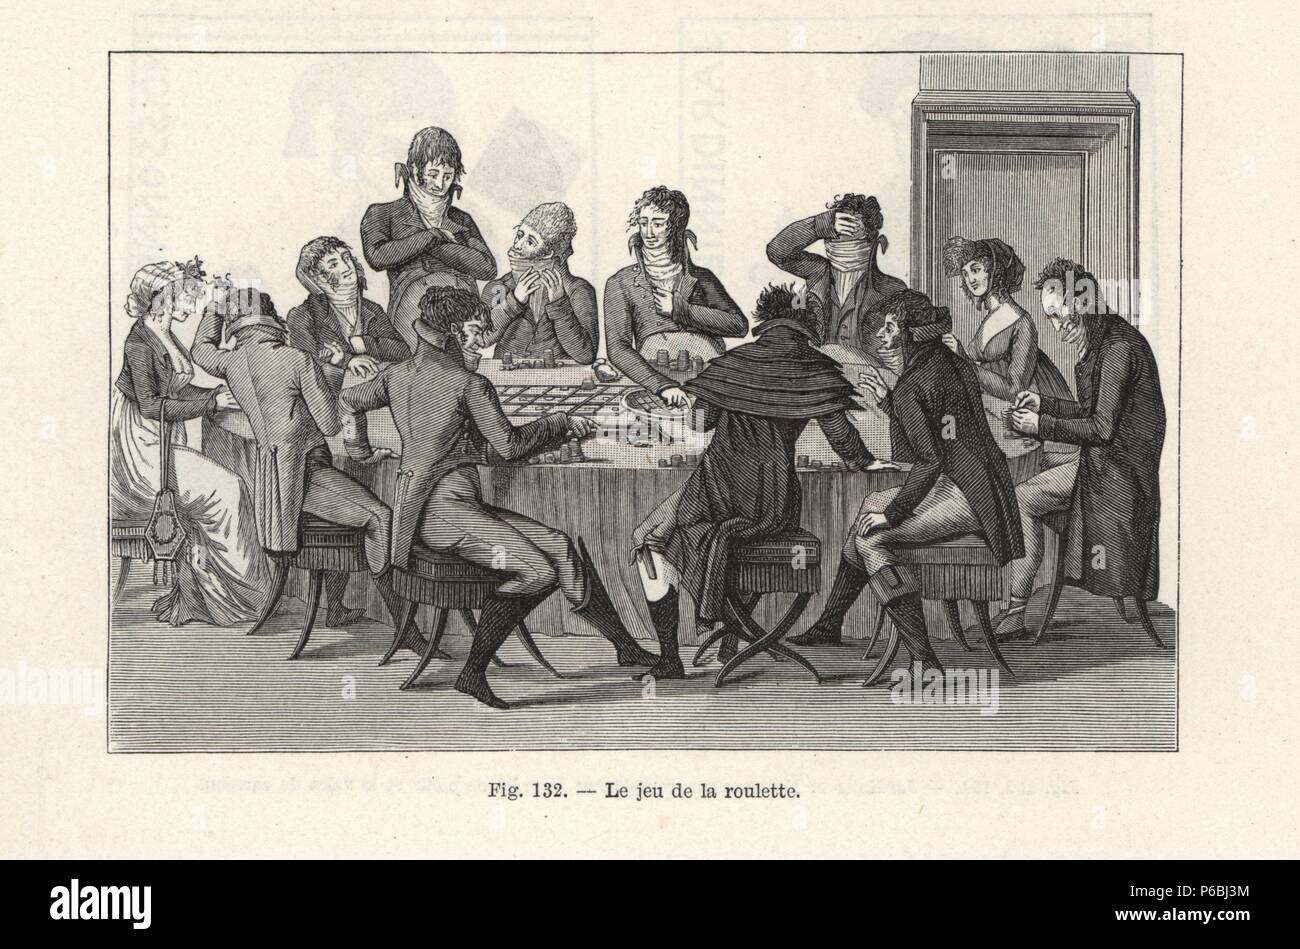 The game of roulette, circa 1800, Paris. Fashionable men in high cravats and frock coats with tails playing roulette in a salong. Engraving from Paul Lacroix's 'Directoire, Consulat et Empire,' Paris, 1884. Stock Photo